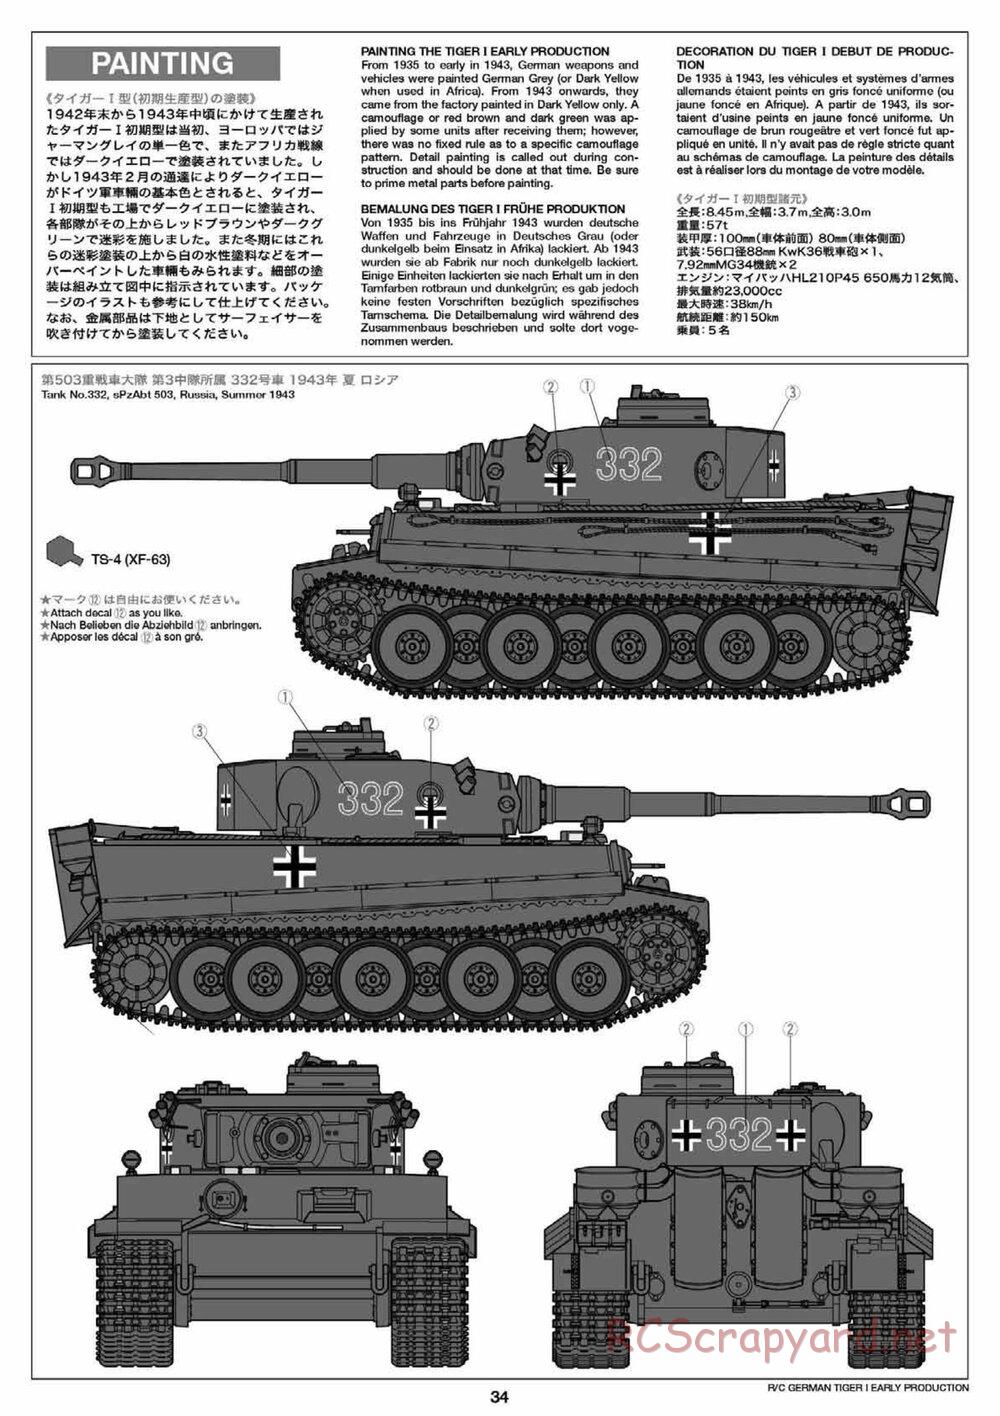 Tamiya - Tiger I Early Production - 1/16 Scale Chassis - Manual - Page 34